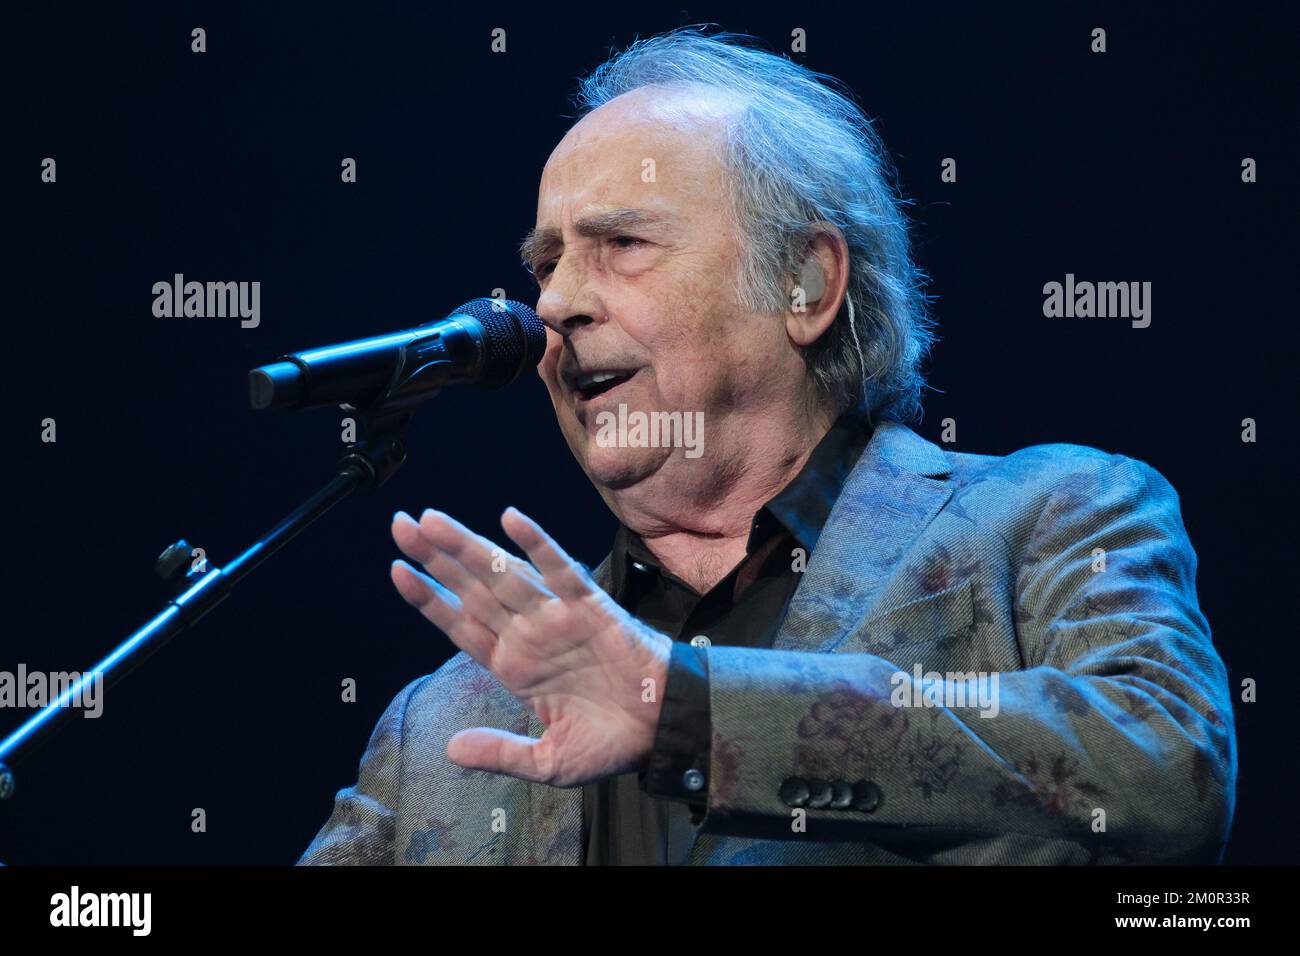 Madrid, Spain. 07th Dec, 2022. Singer-songwriter Joan Manuel Serrat performs during the tour 'El vicio de cantar 1965-2022' at the Wizink Center in Madrid. (Photo by Atilano Garcia/SOPA Images/Sipa USA) Credit: Sipa USA/Alamy Live News Stock Photo